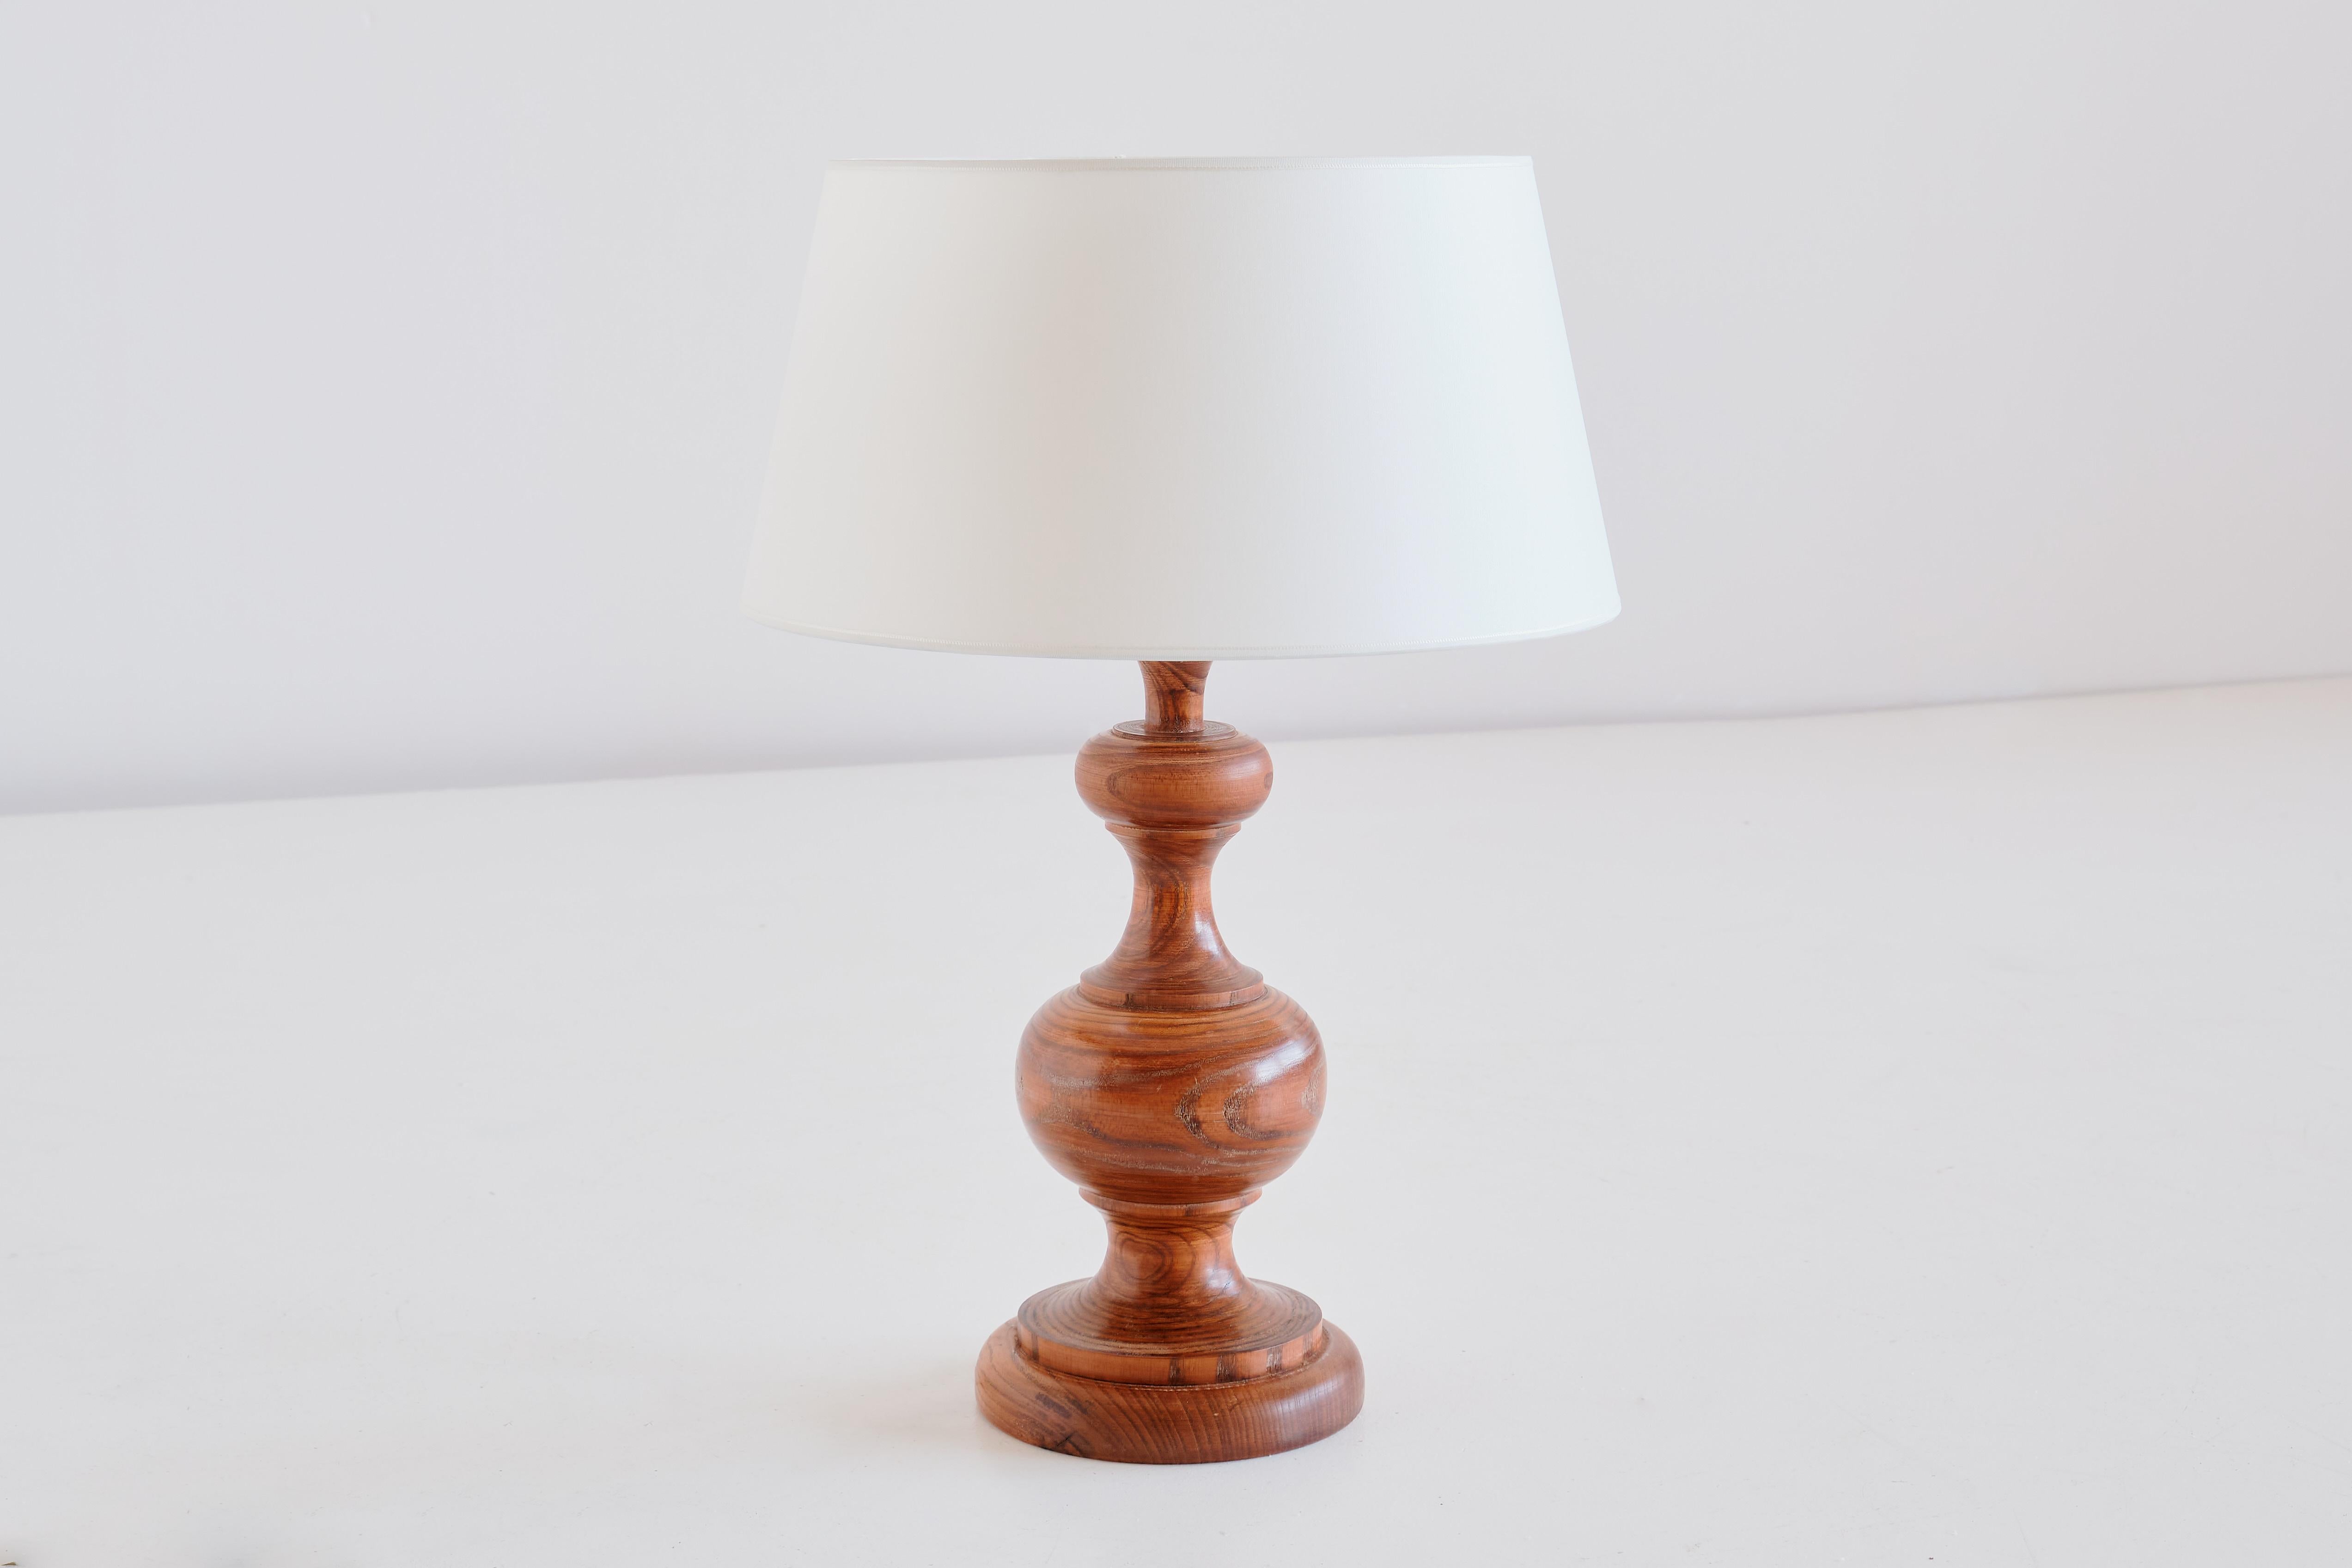 This rustic and elegant table lamp was produced in France in the 1950s. The lamp is made of solid oakwood displaying a striking wood grain. The new ivory shade in tapered drum shape distributes a soft and pleasant light .The wiring has been renewed